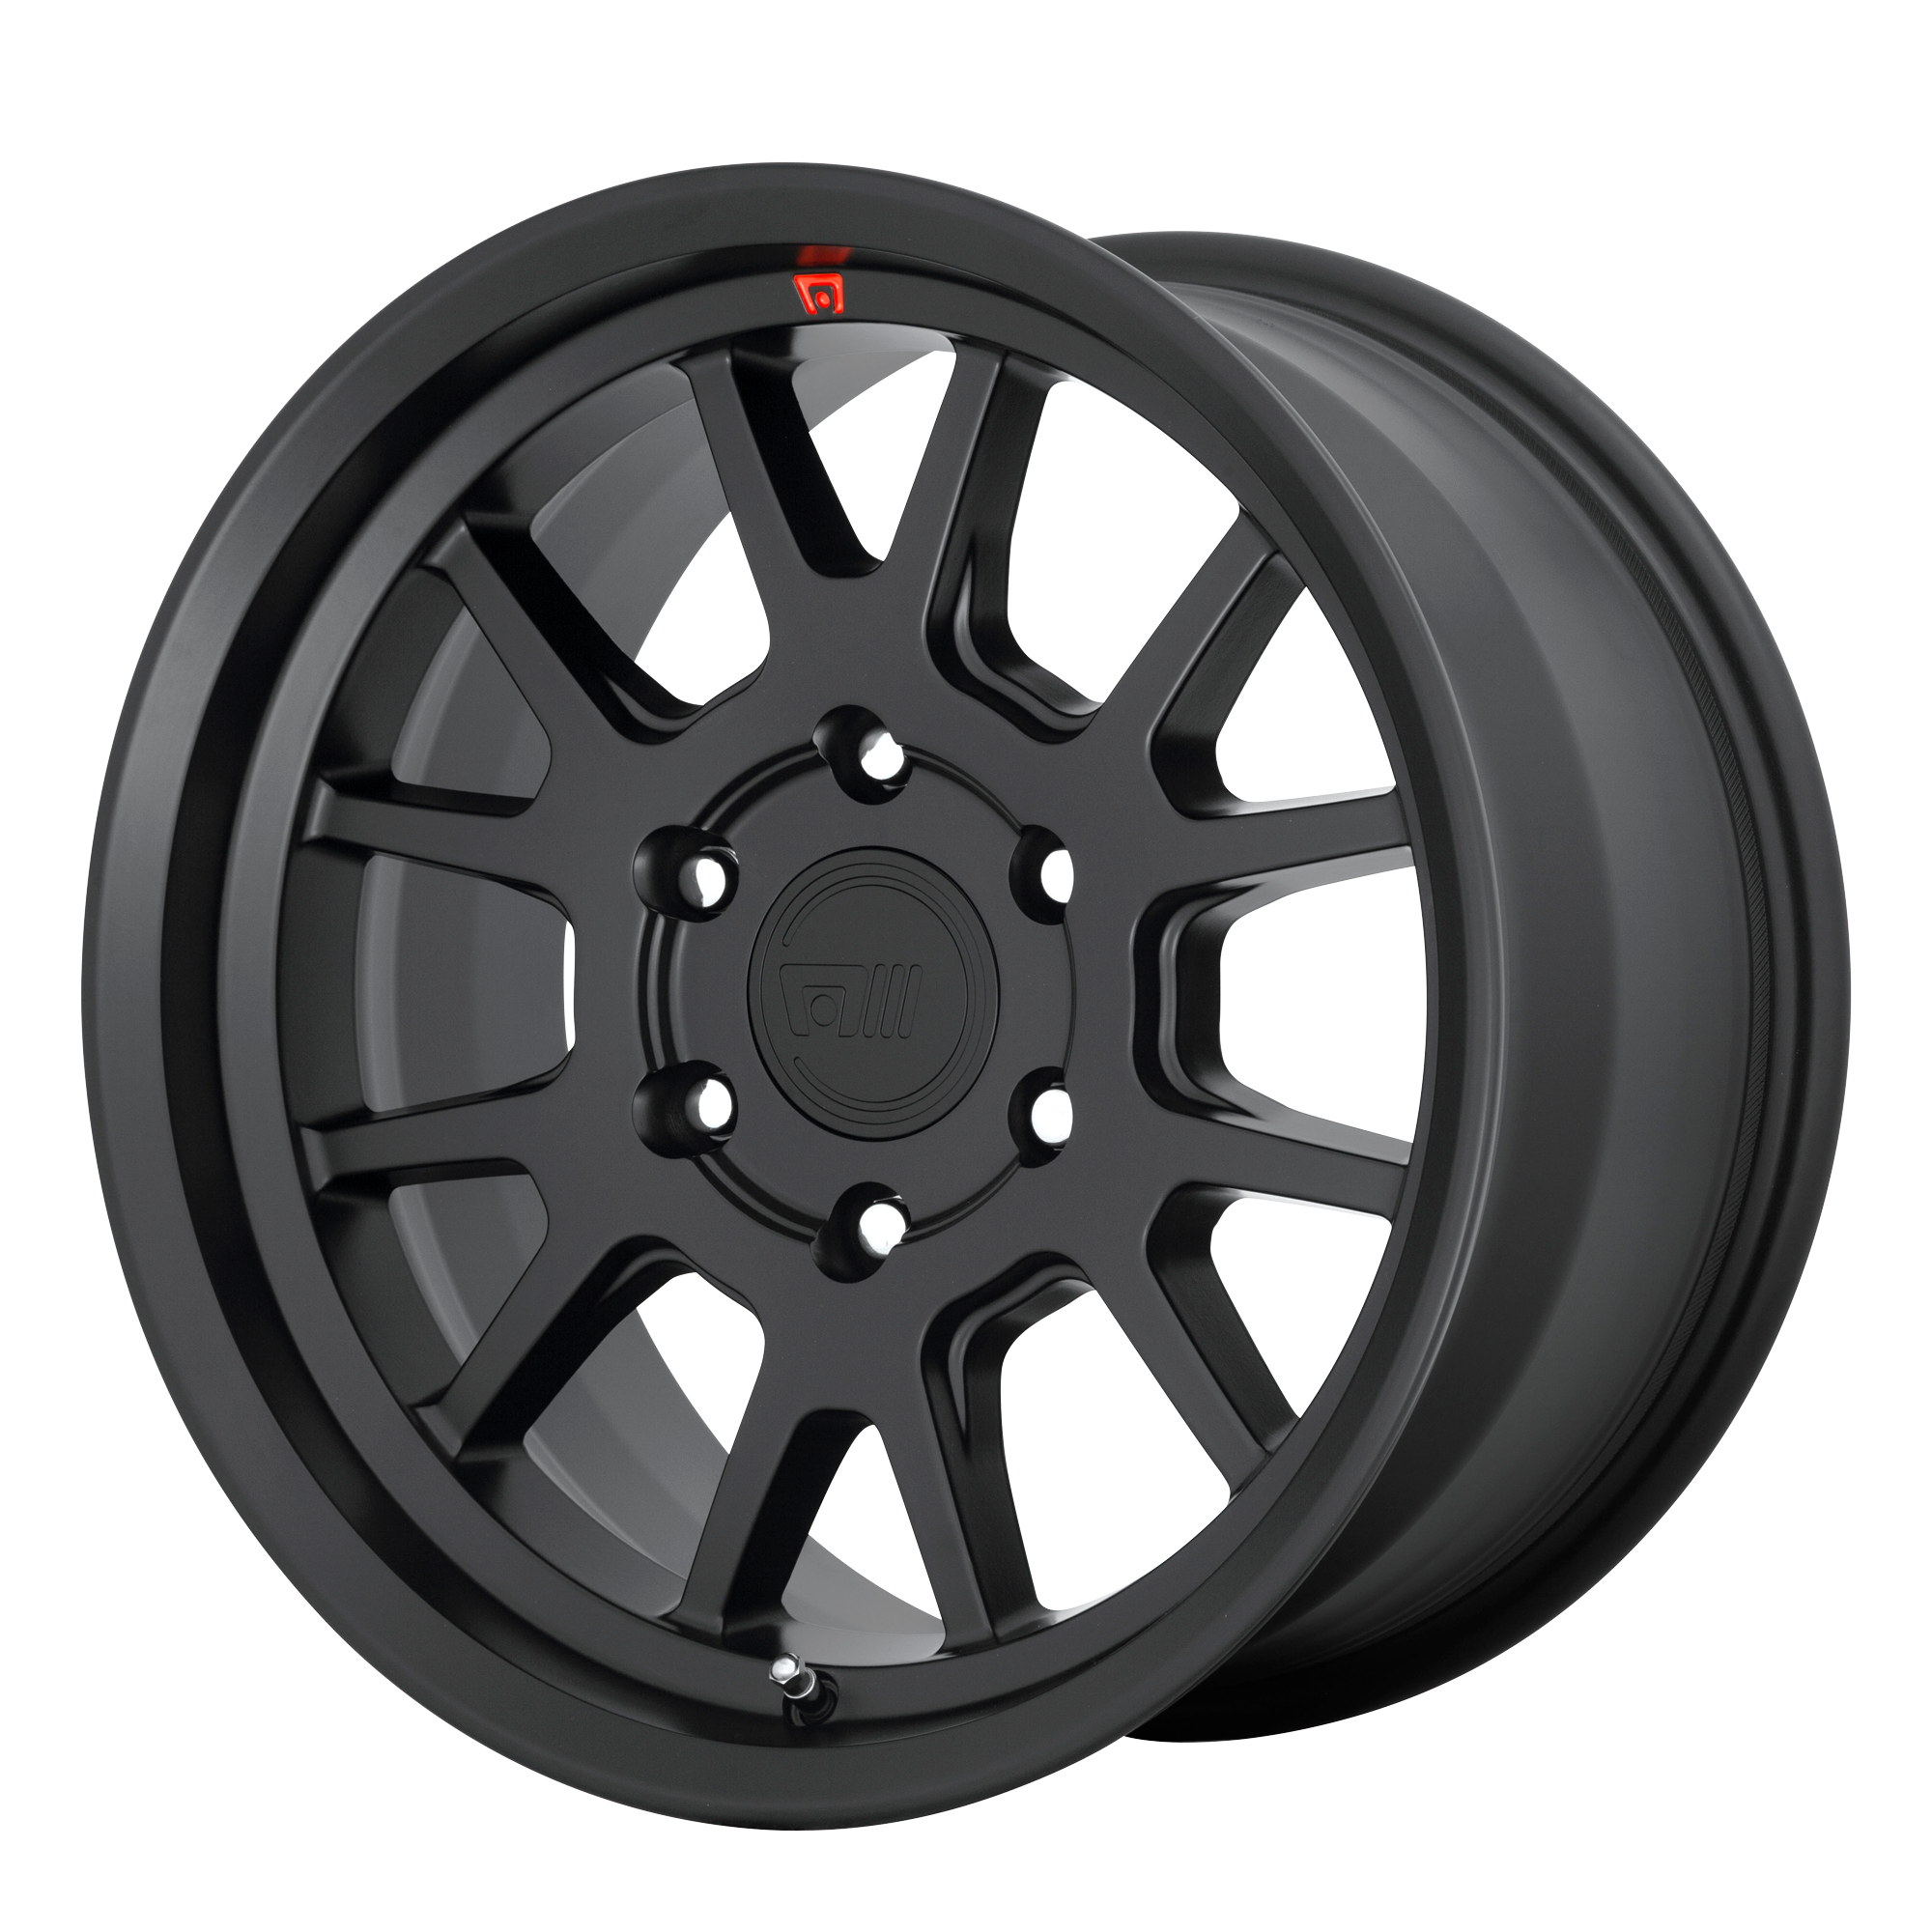 MT6 17x8.5 6x139.70 SATIN BLACK (0 mm) - Tires and Engine Performance